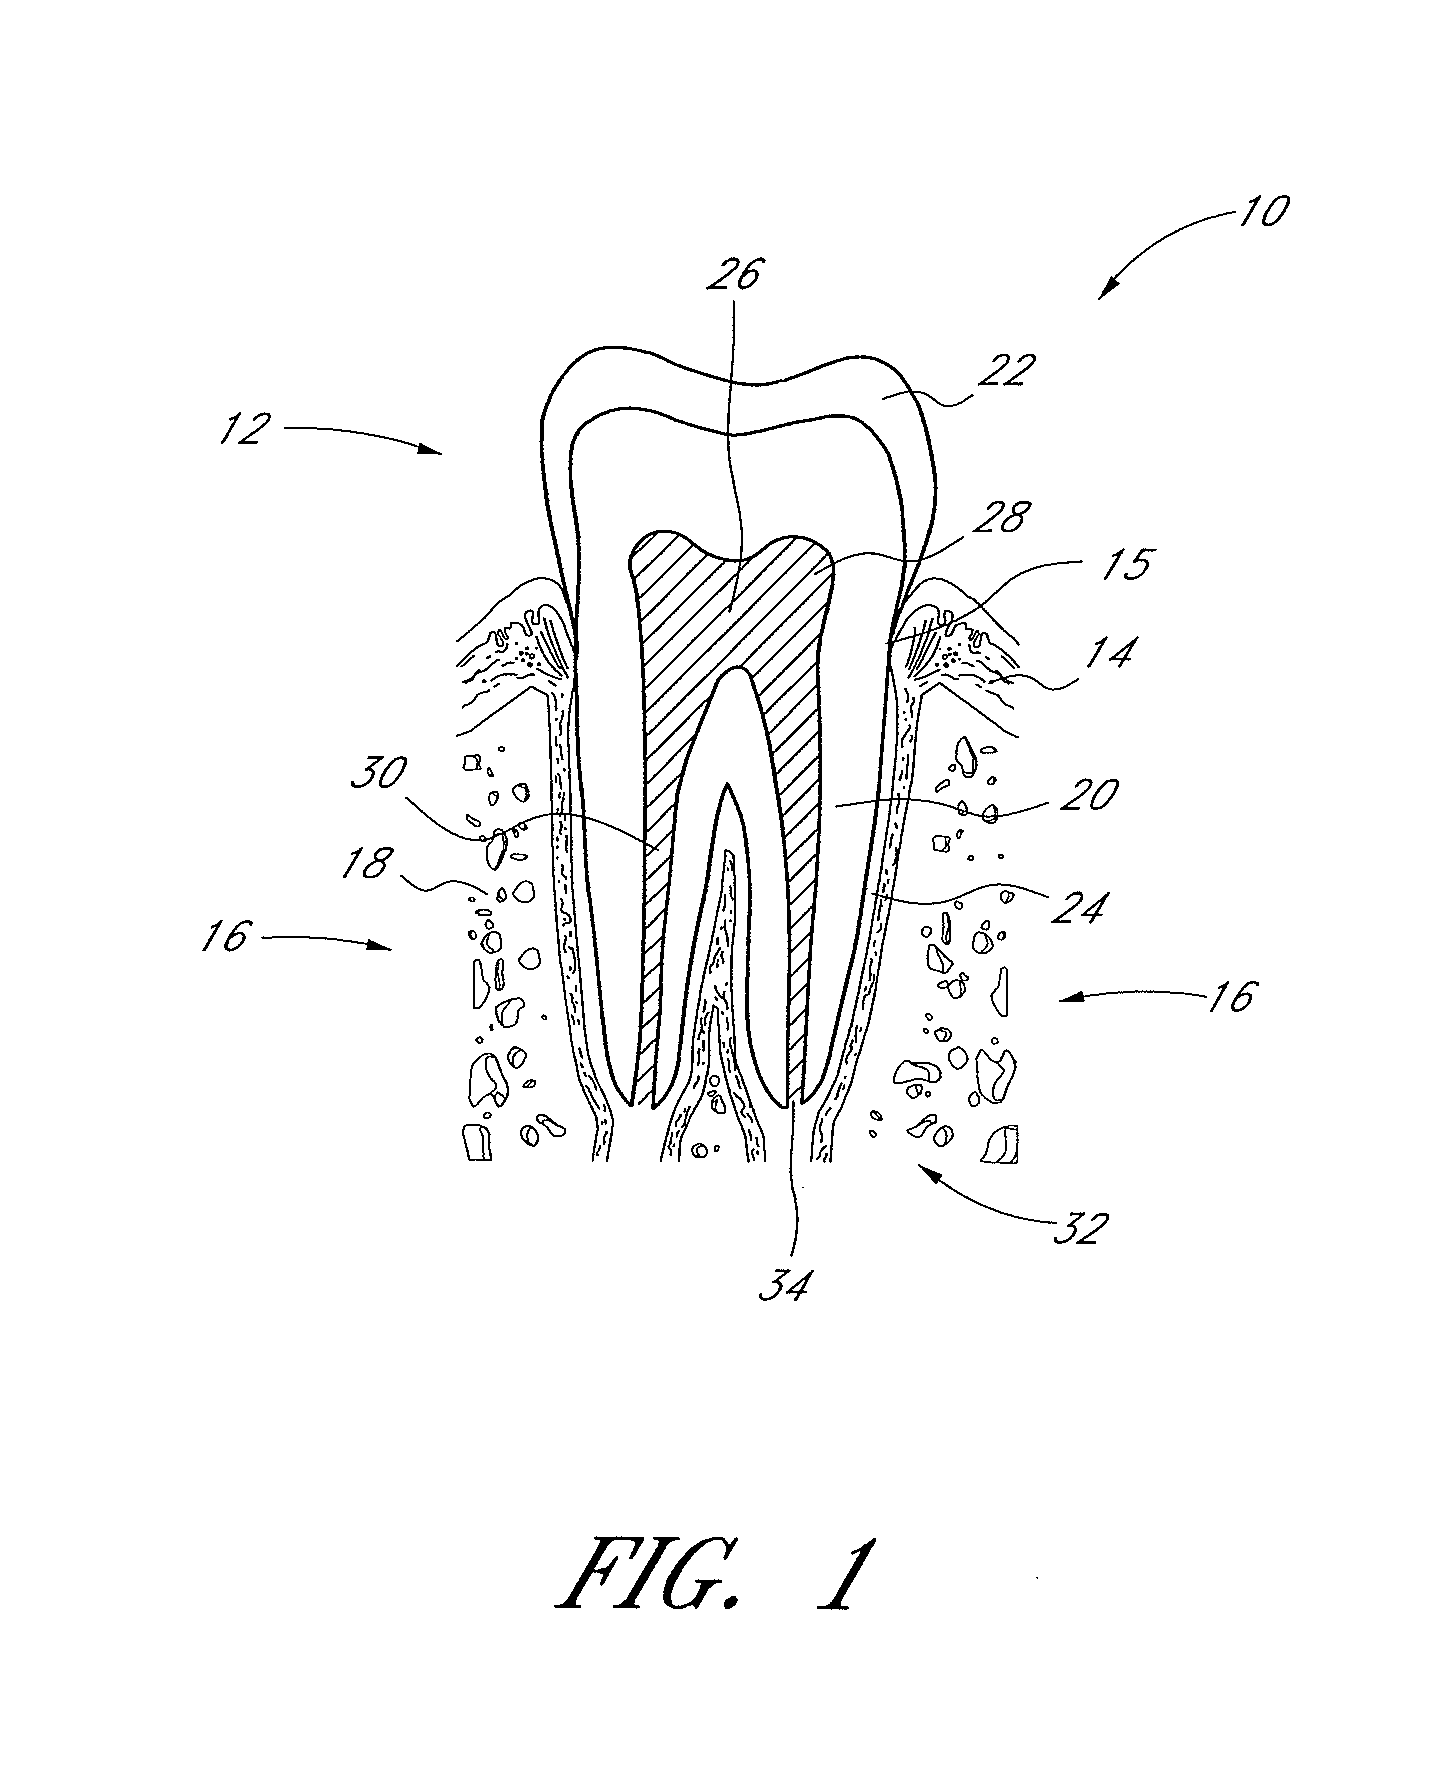 Apparatus and methods for root canal treatments